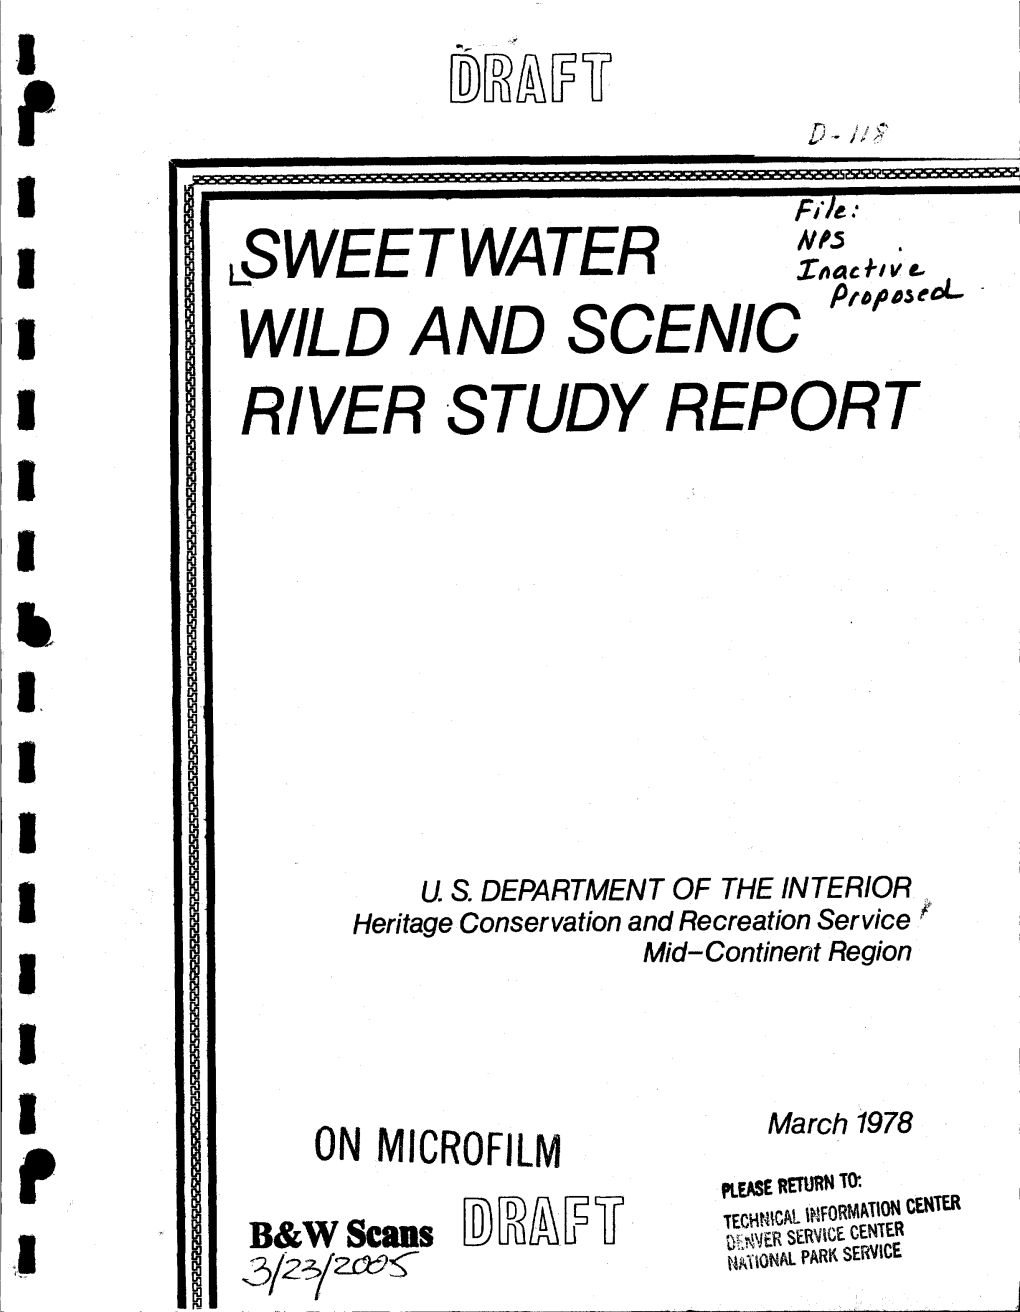 LSWEETWATER Z^A,,, WILD and SCENIC RIVER STUDY REPORT S&Ws^D °QG4